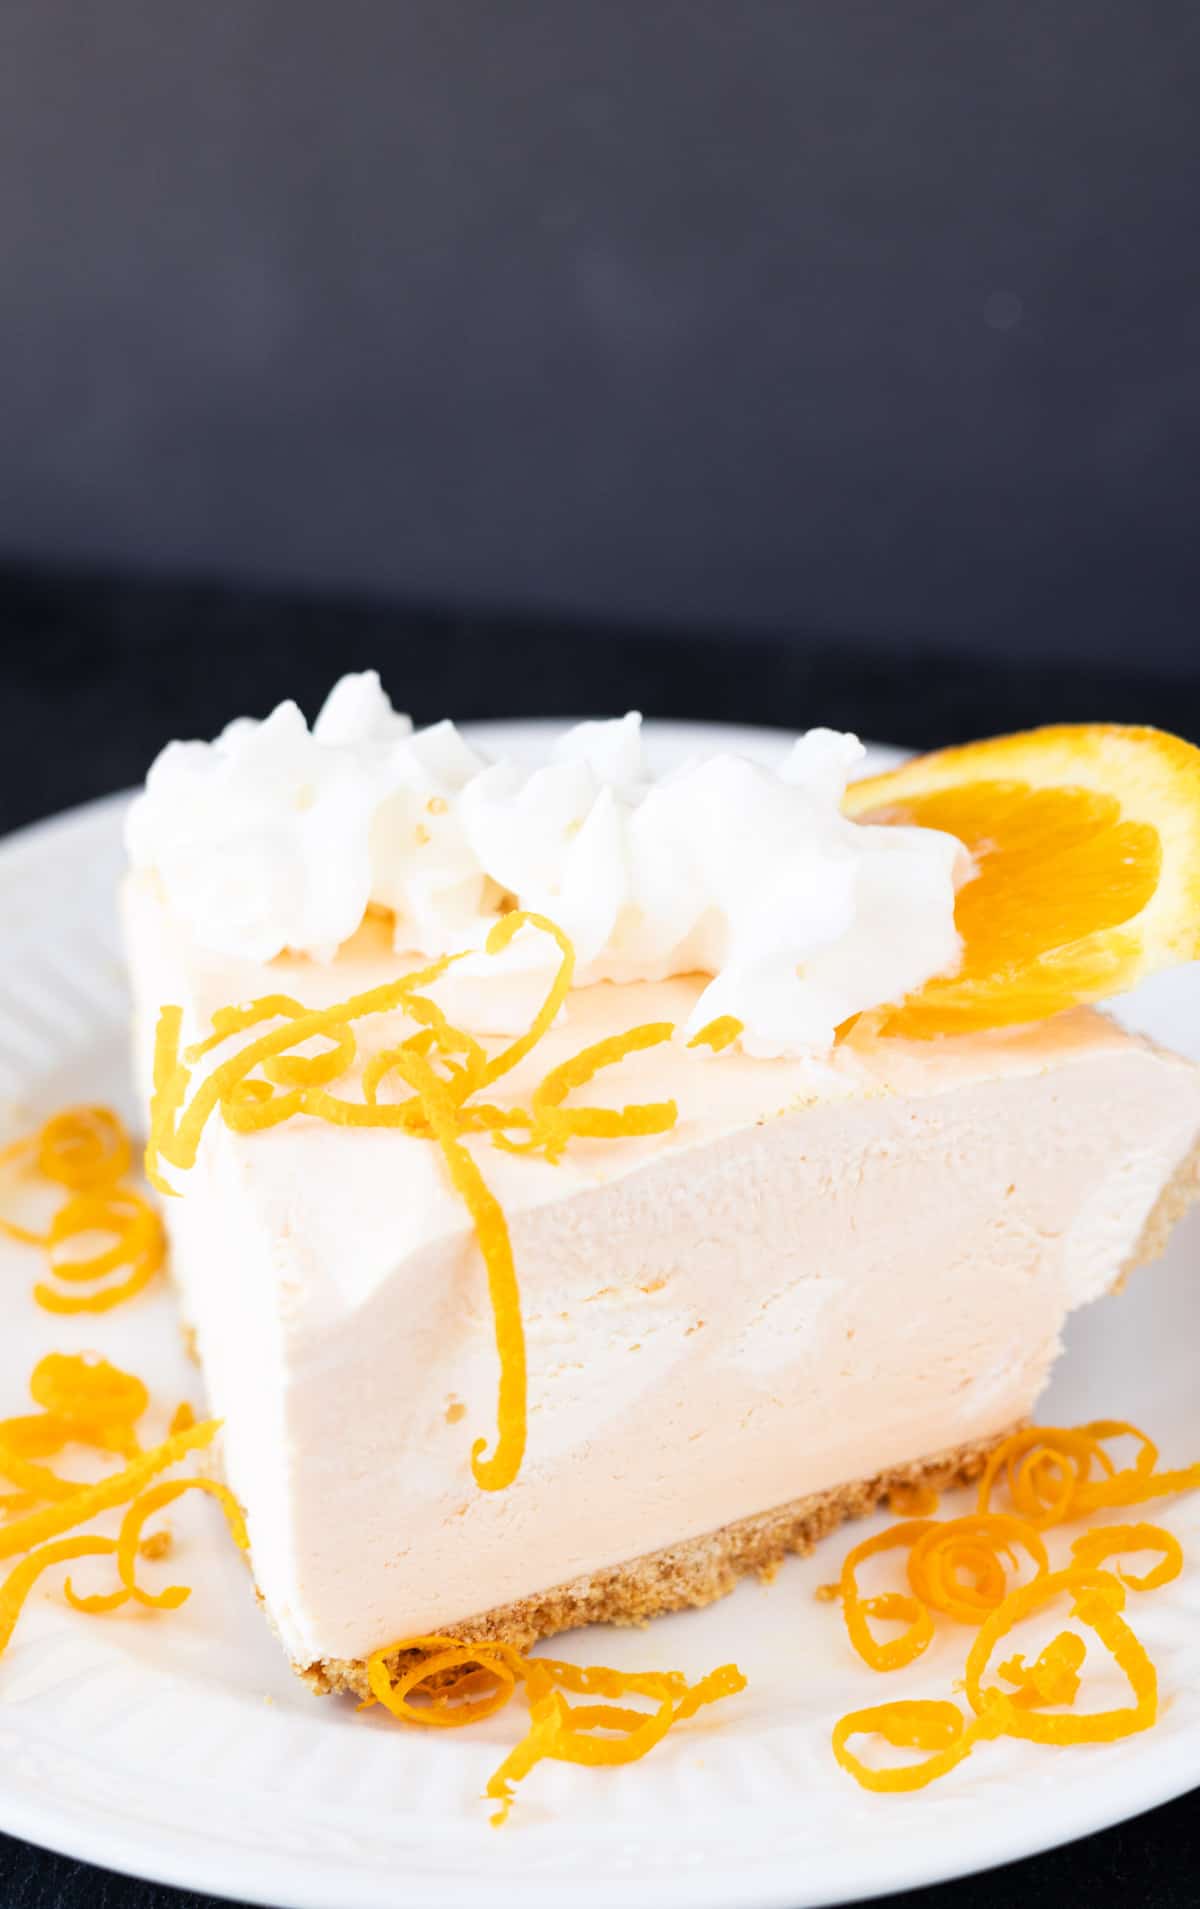 A slice of creamy orange cheesecake with orange zest and whipped cream.